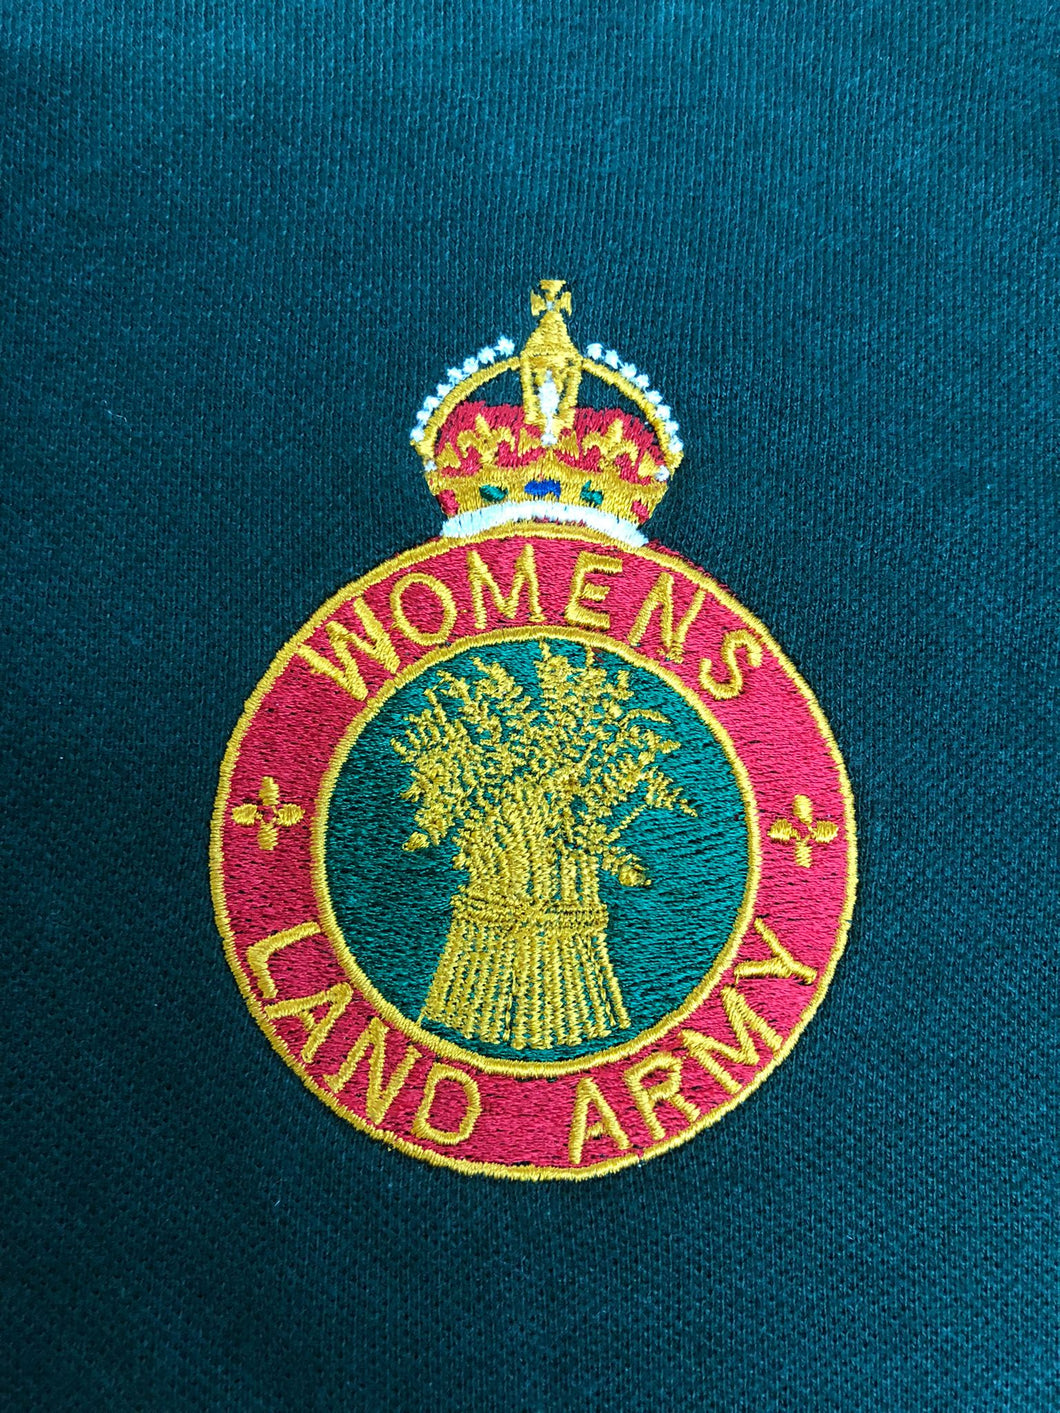 WW2 Womens Land Army (WLA) - Embroidered Design - Choose your Garment